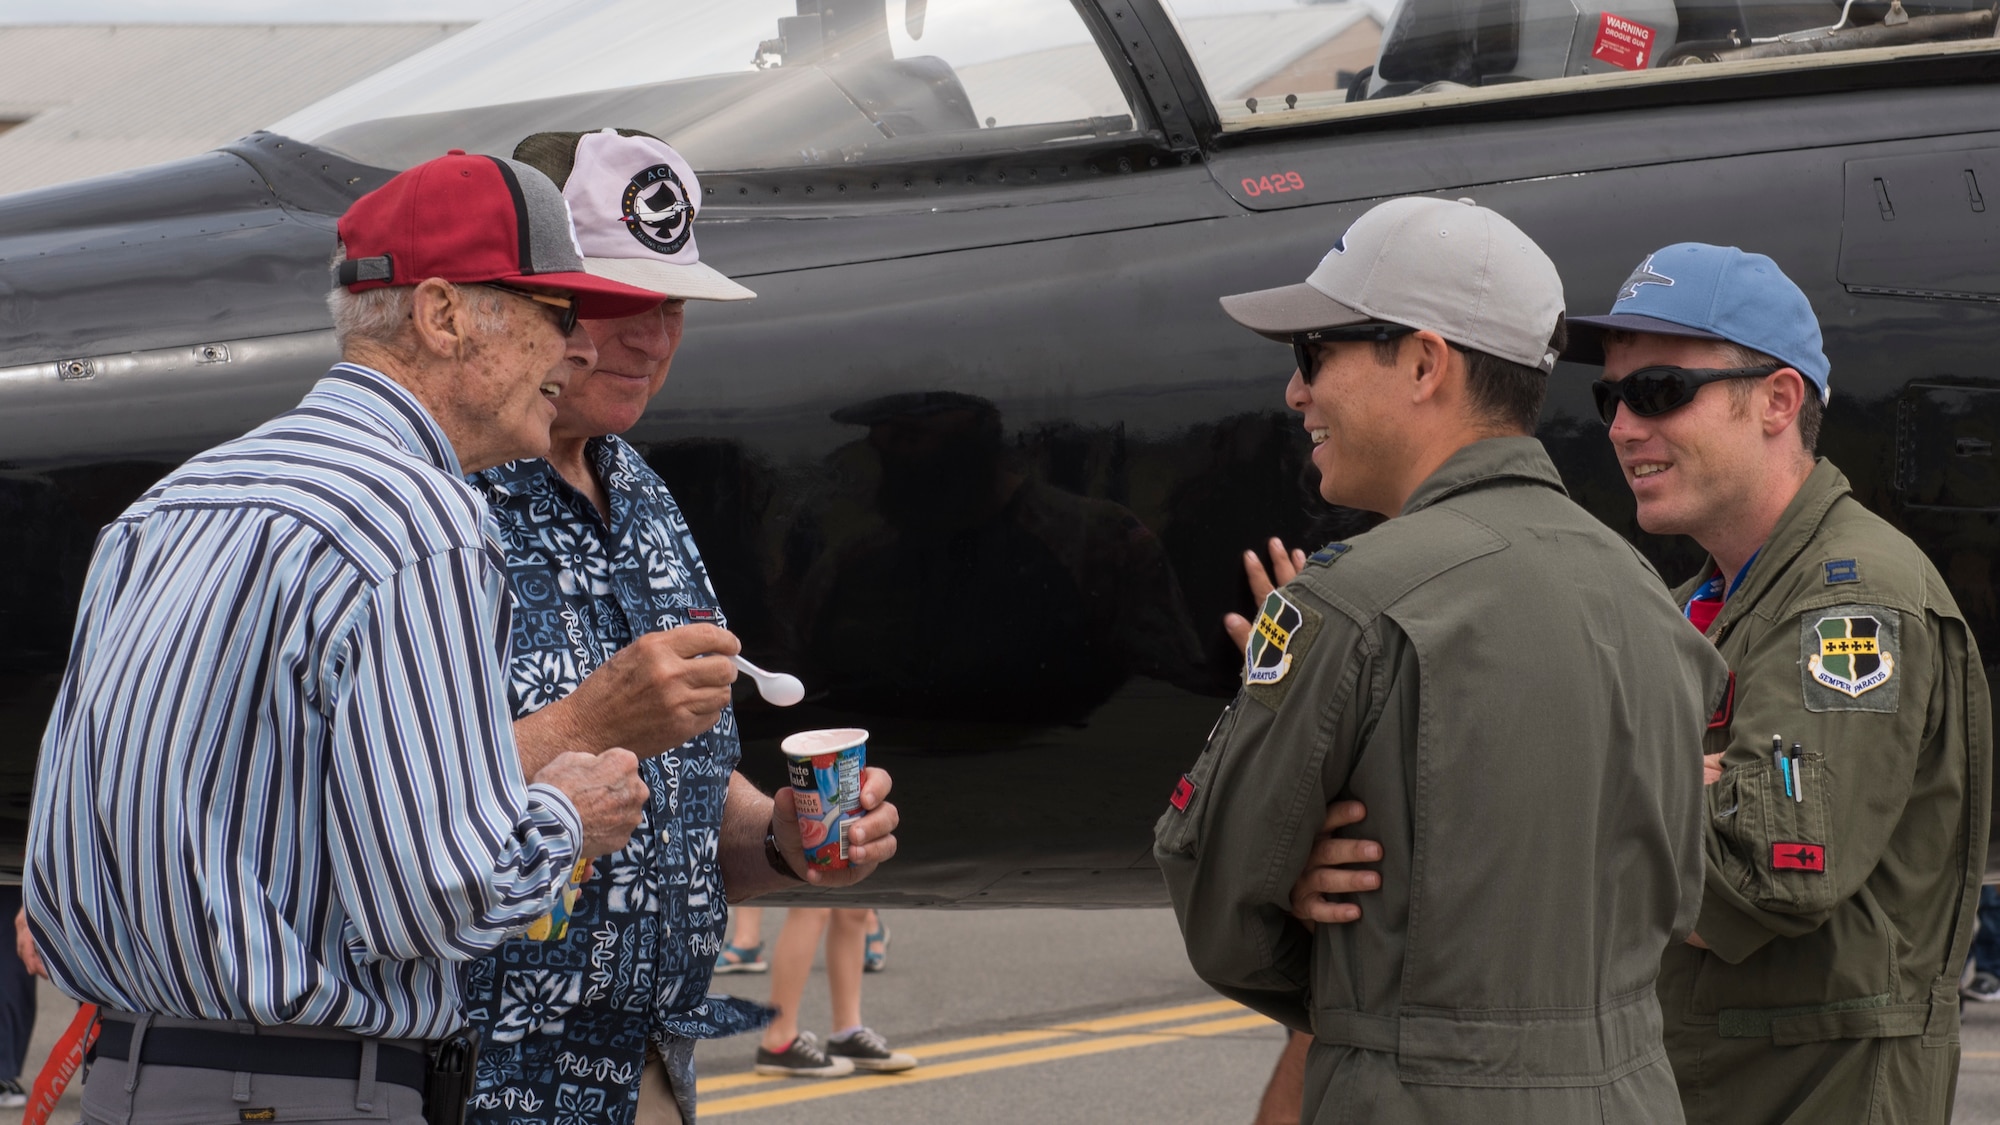 Attendees converse with pilots of a T-38 Talon static display aircraft at the 2019 Skyfest Open House and Air Show at Fairchild Air Force Base, Washington, June 22, 2019. Skyfest 2019 gave the Inland Northwest a chance to meet members of Team Fairchild and see the U.S. Air Force’s premier air refueling wing in action during a simulated KC-135 Stratotanker low-pass refuel of a C-17 Globemaster III.(U.S. Air Force photo by Senior Airman Ryan Lackey)